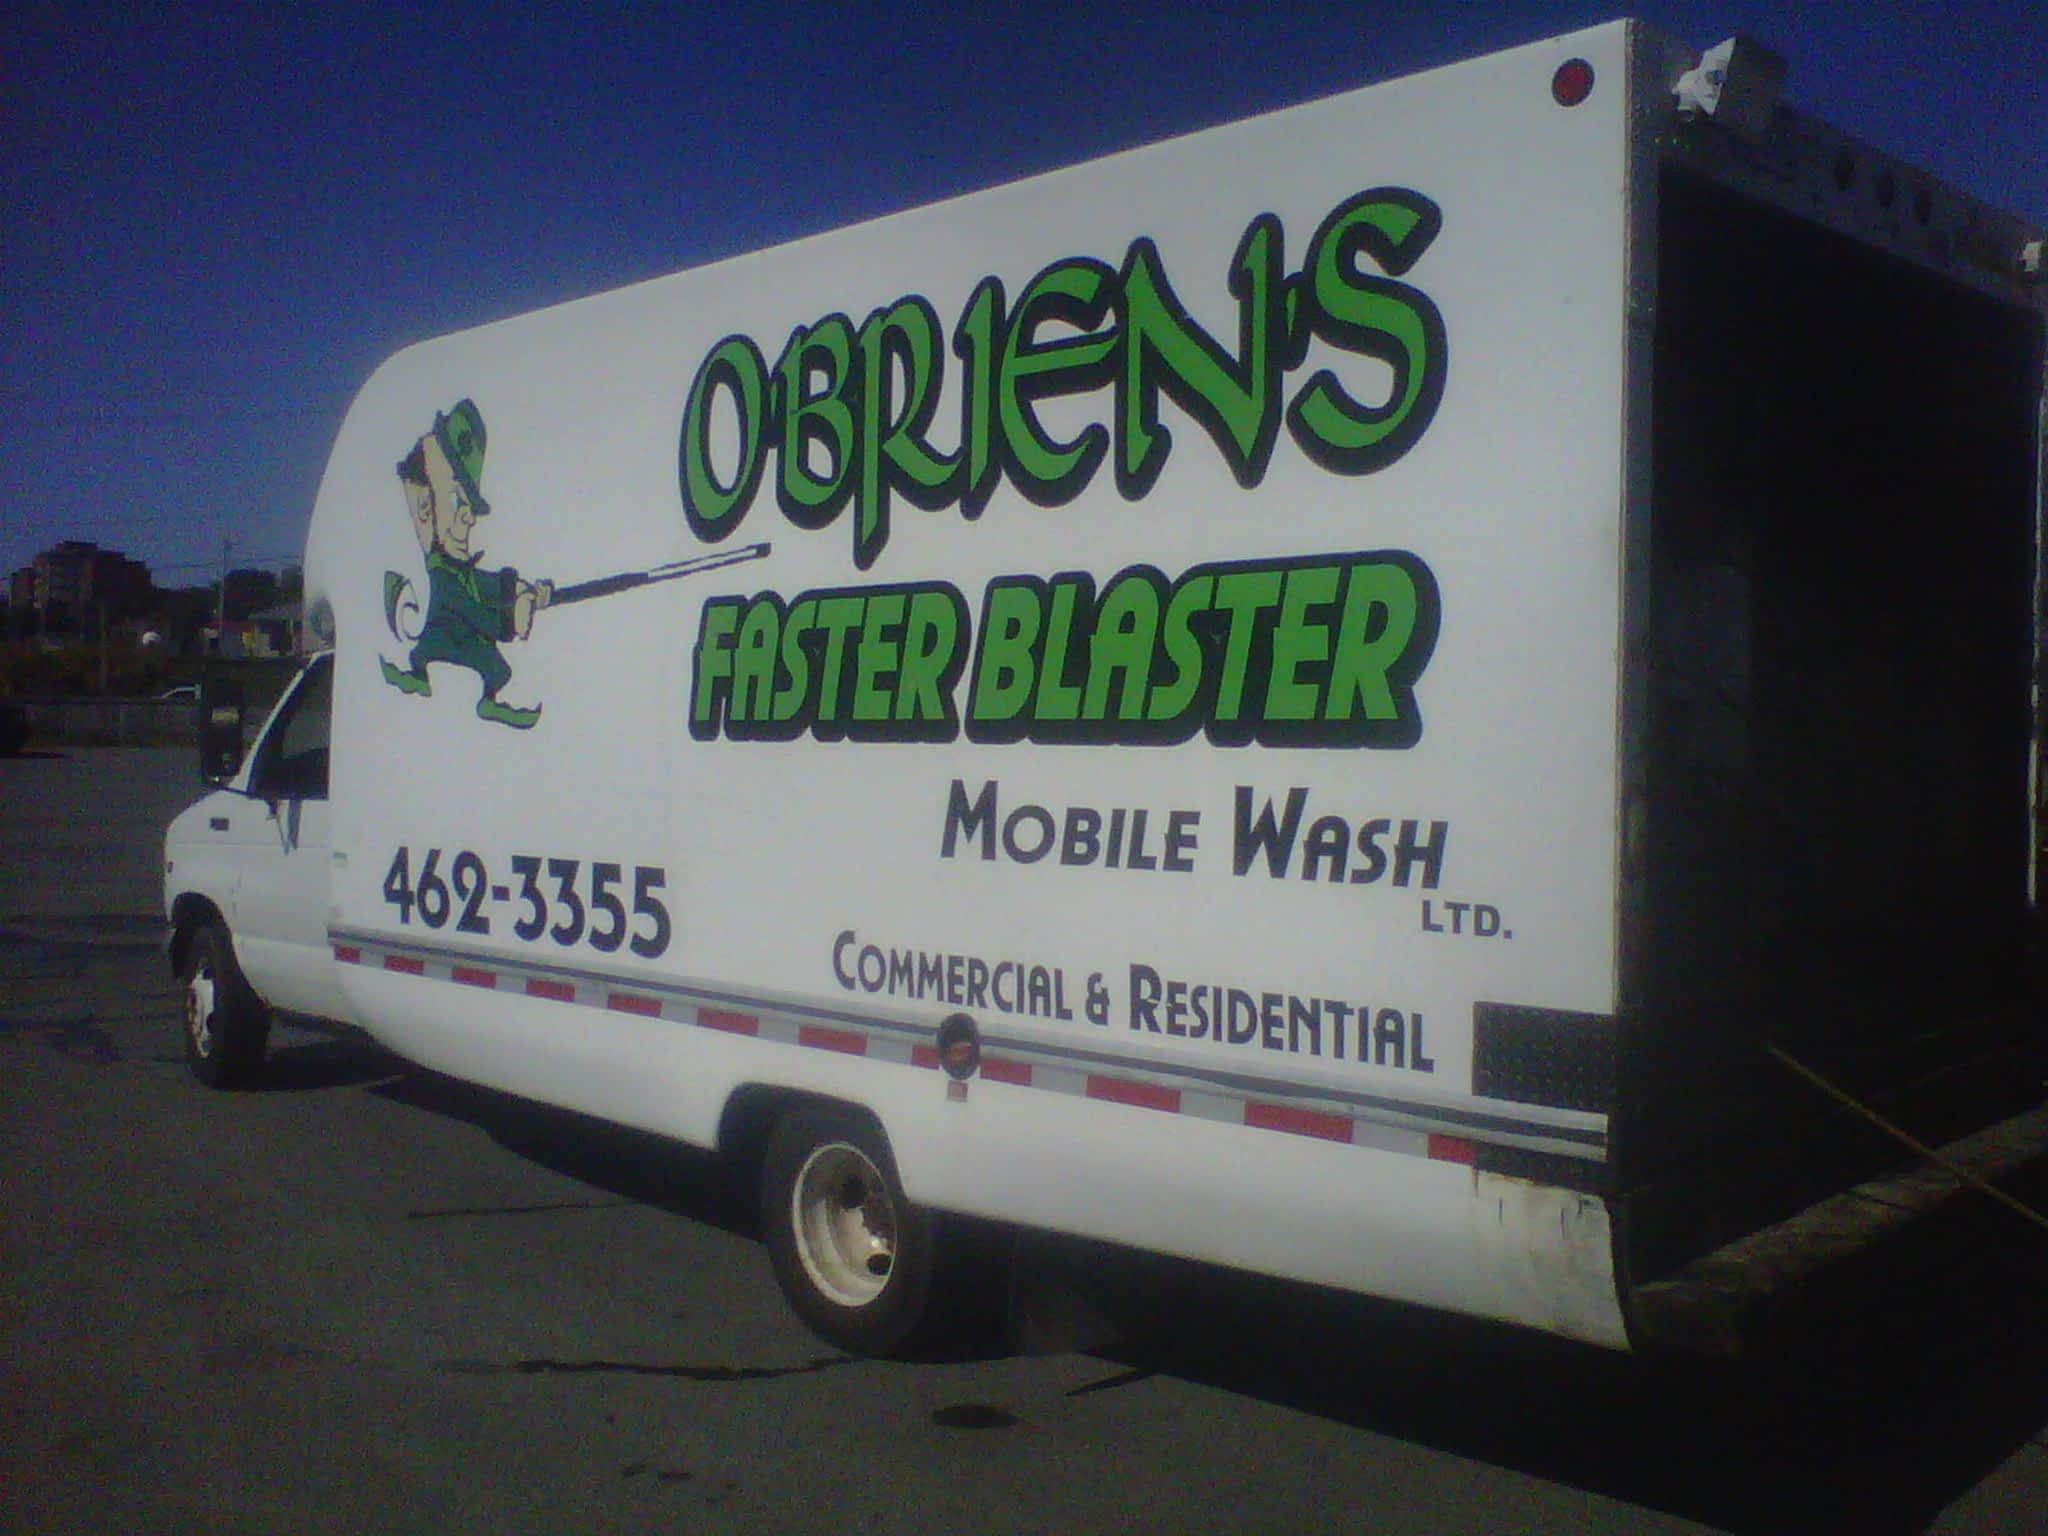 photo O'Brien's Faster Blaster Mobile Wash Limited